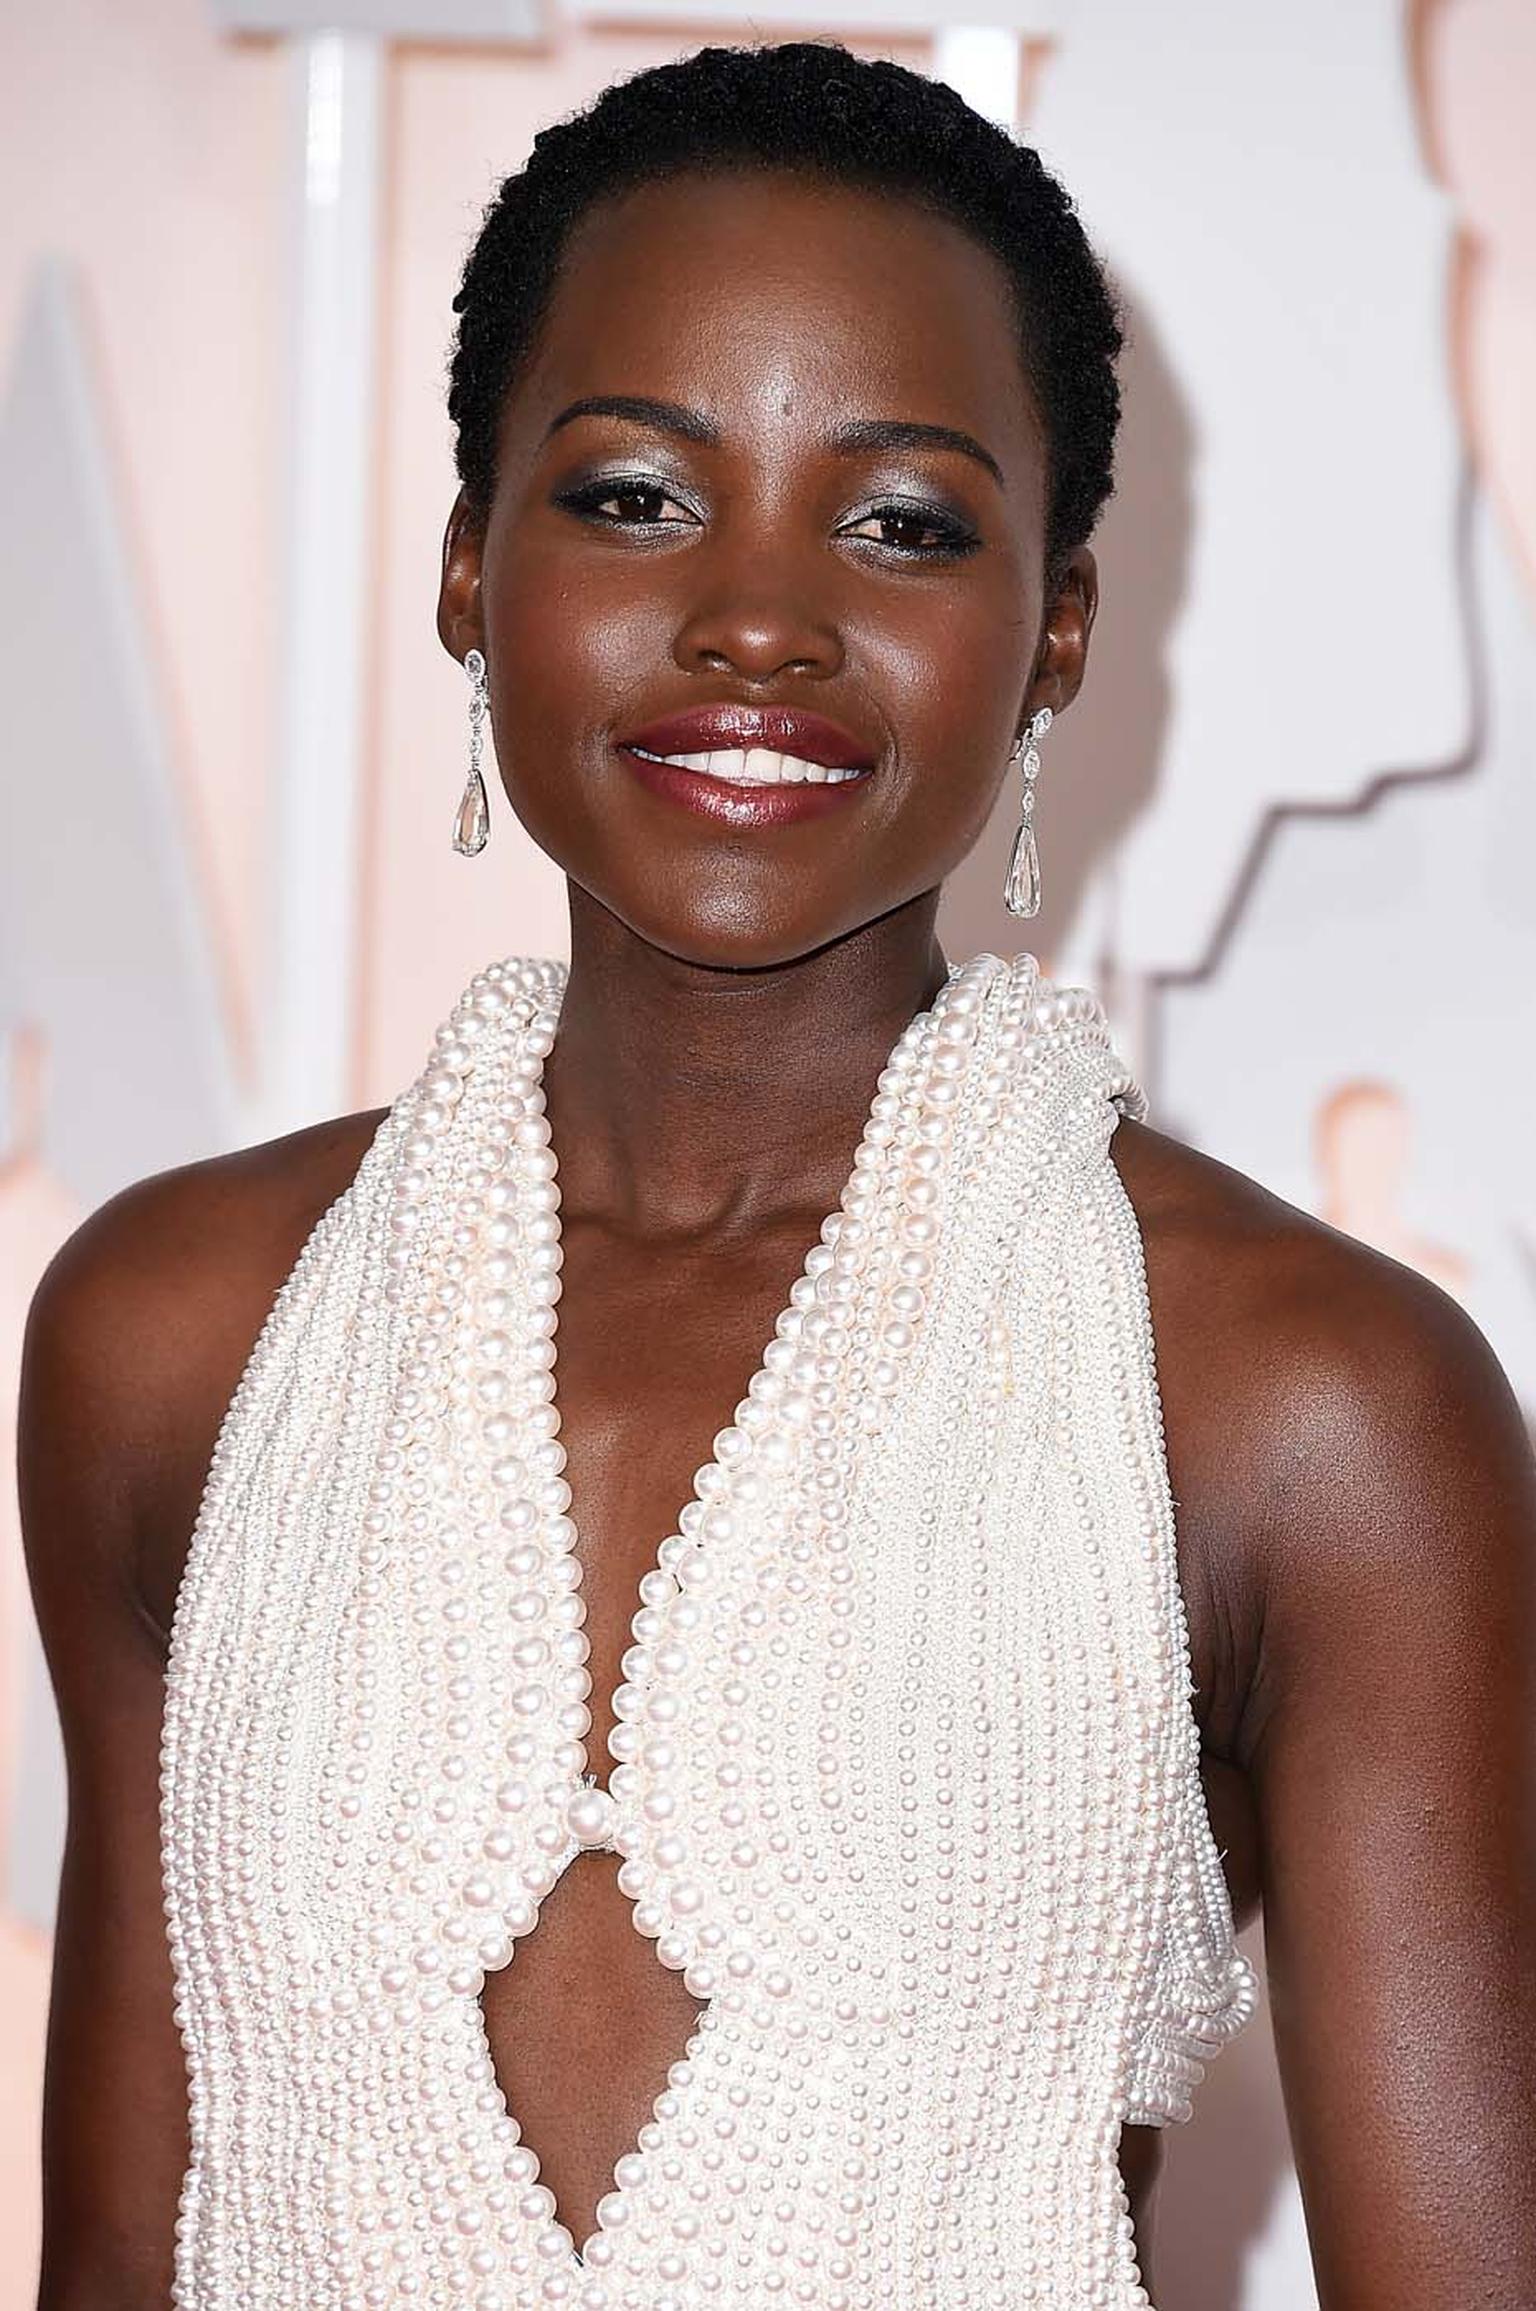 Actress Lupita Nyong’o walked the Oscars red carpet wearing a pair of Chopard diamond earrings featuring pear-shaped and rose-cut diamonds and three Chopard diamond rings, which added extra sparkle to her pearl-embellished Calvin Klein dress.